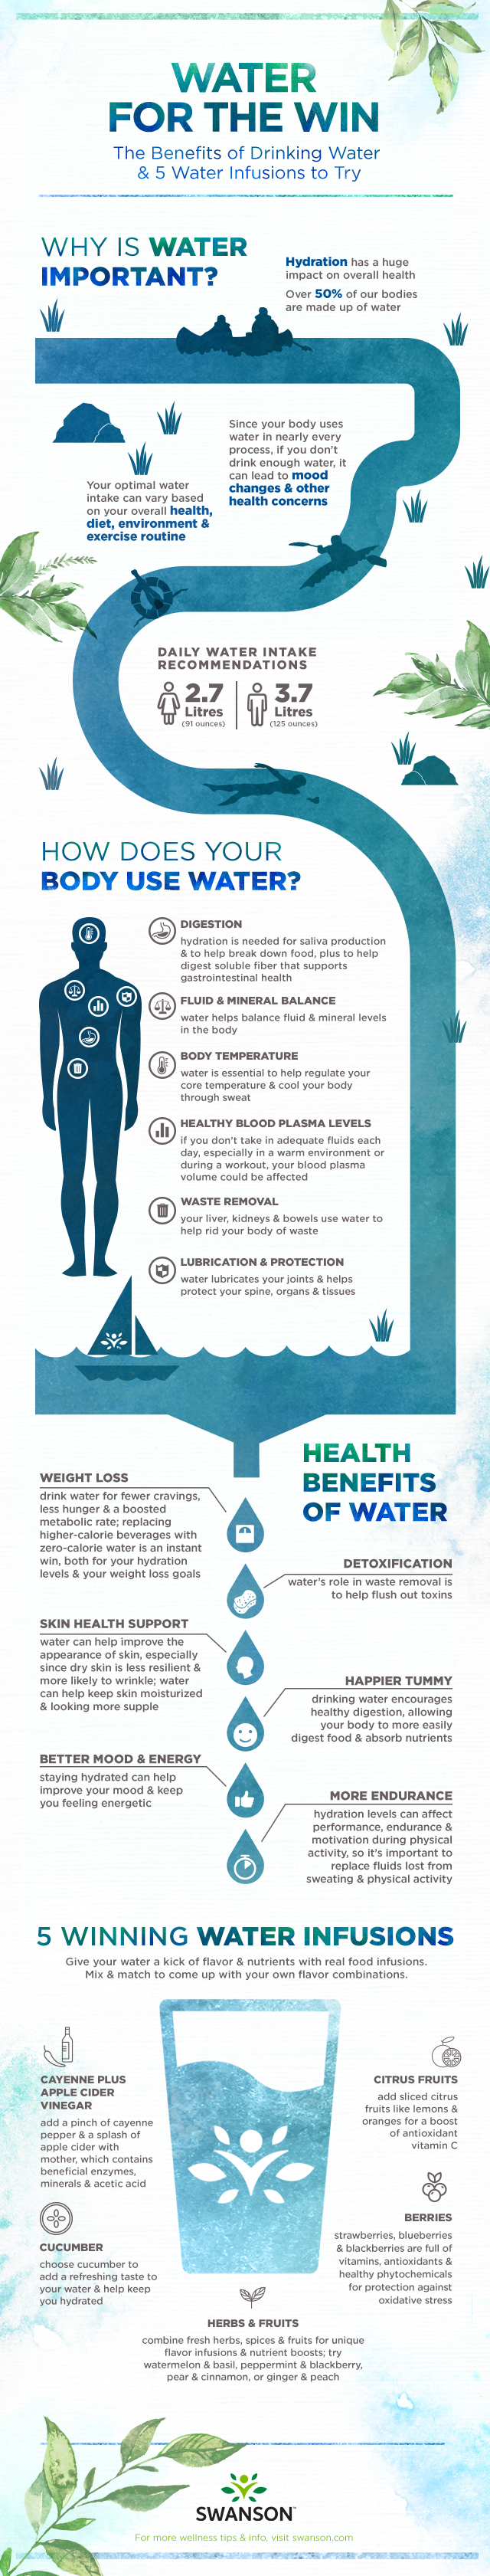 Water for the Win Infographic